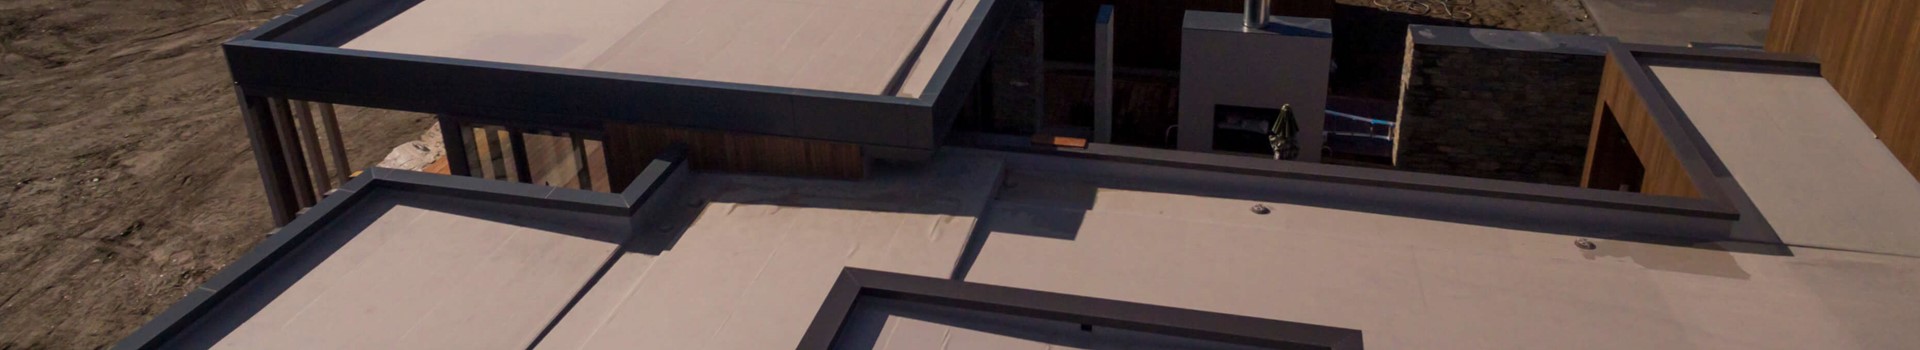  WarmSpan - the future of low-slope roofing